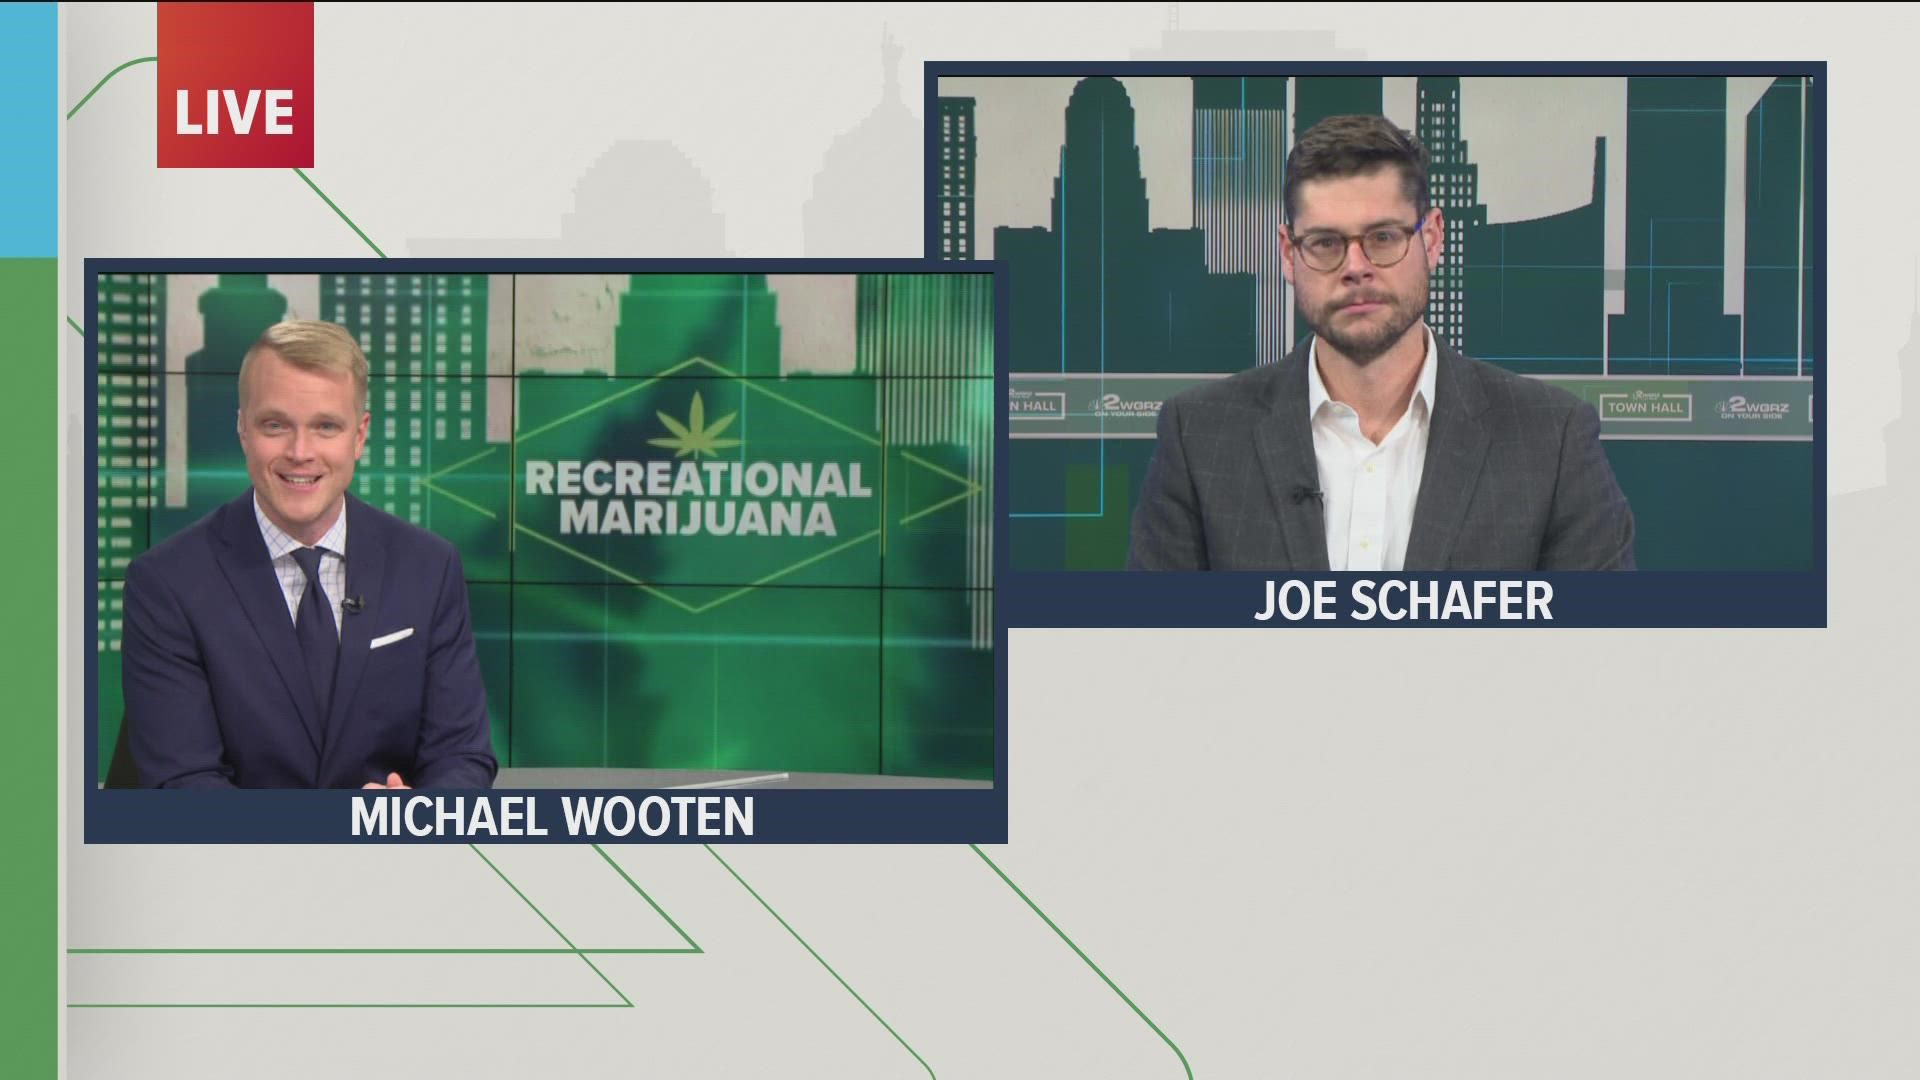 Guest Joe Schafer, an attorney at Lippes Mathias who specializes in cannabis law.